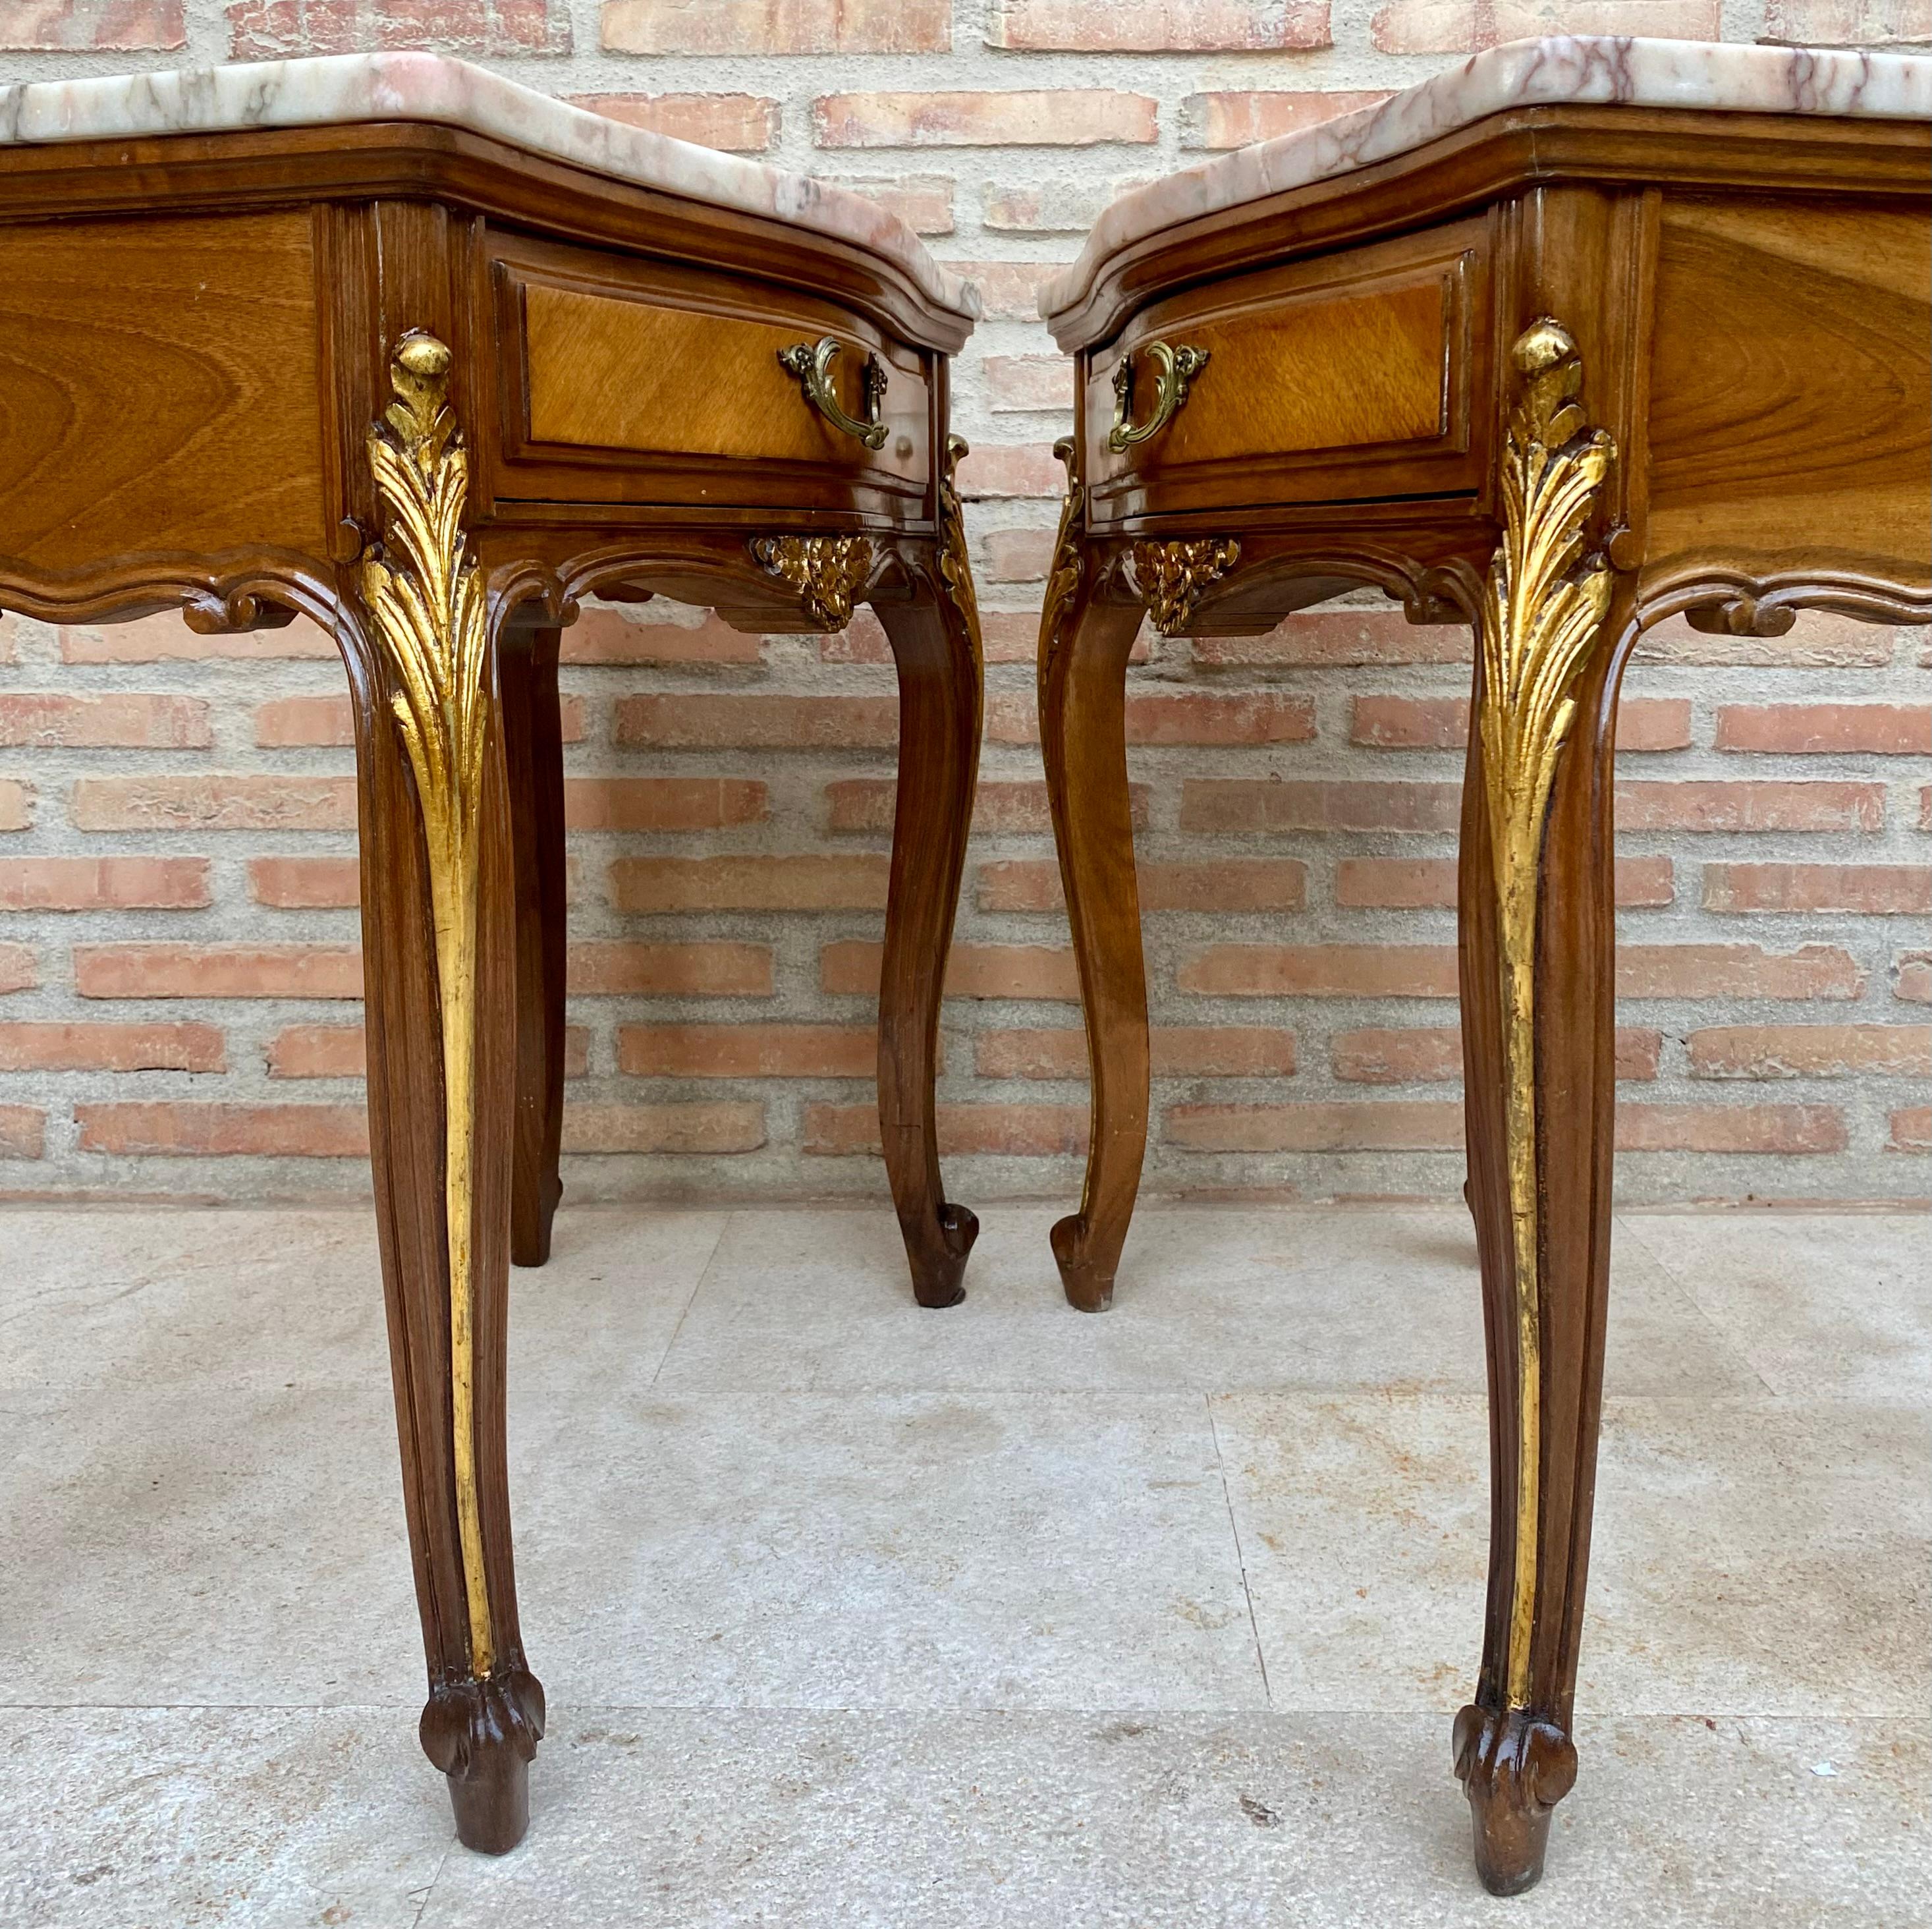 20th Century French Nightstands with One Drawer, Marble Top and Cabriole Legs, 1 For Sale 2